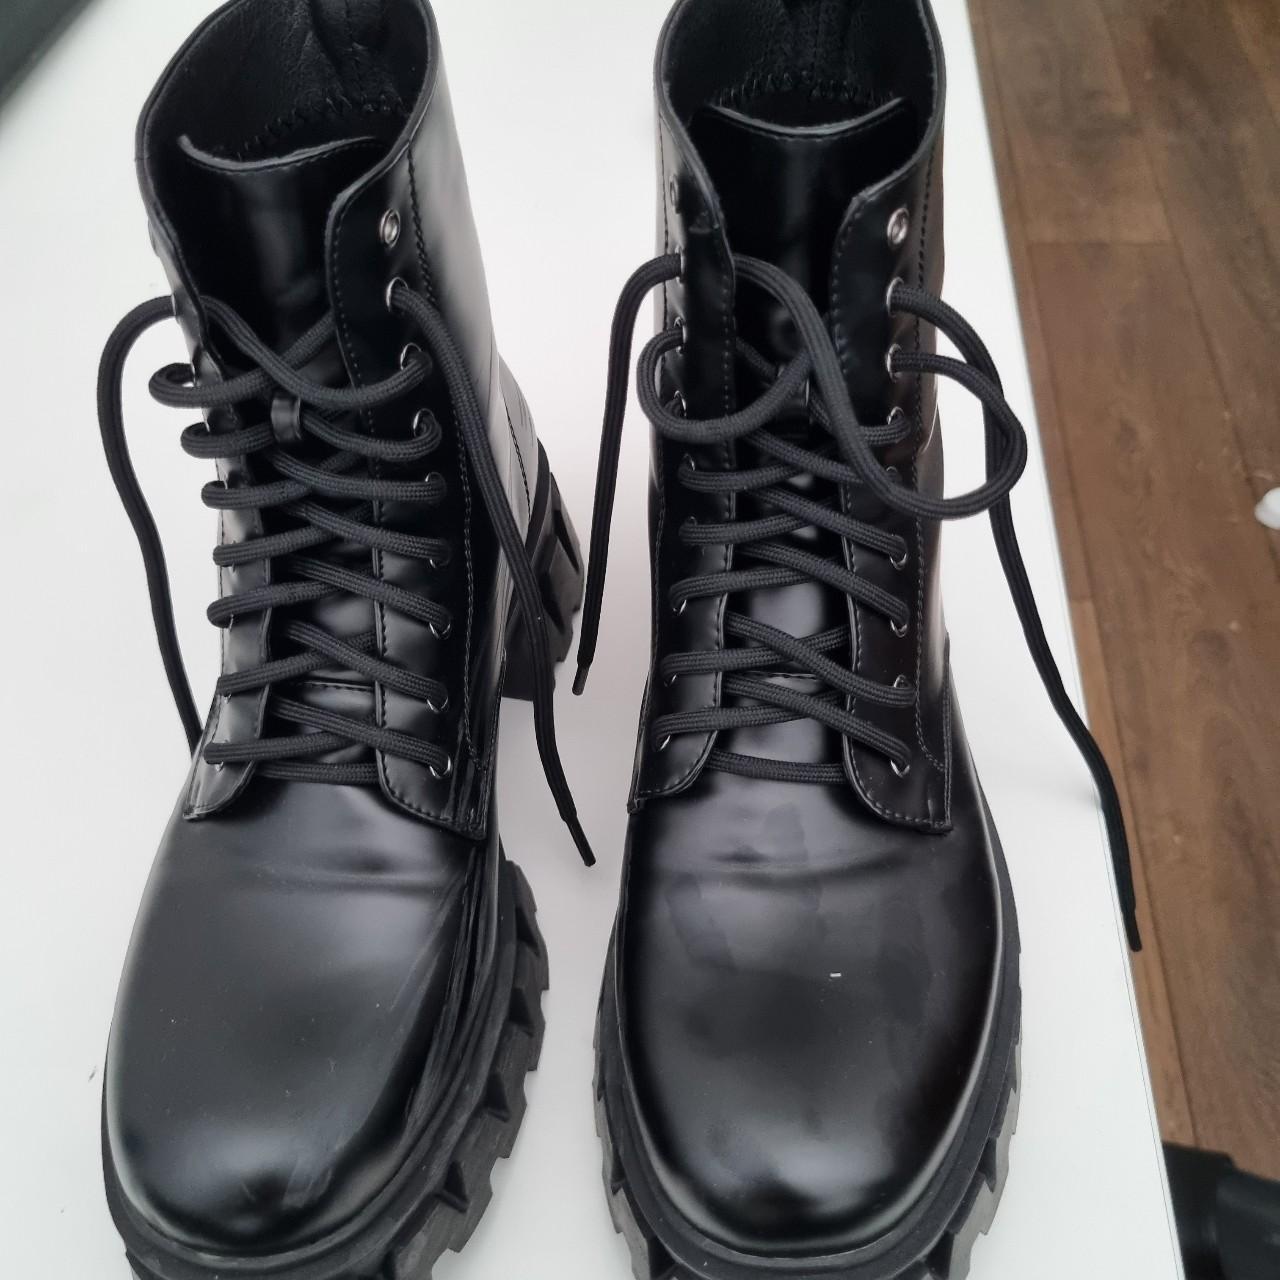 Koi shadow platform lace up boots in black. Just... - Depop